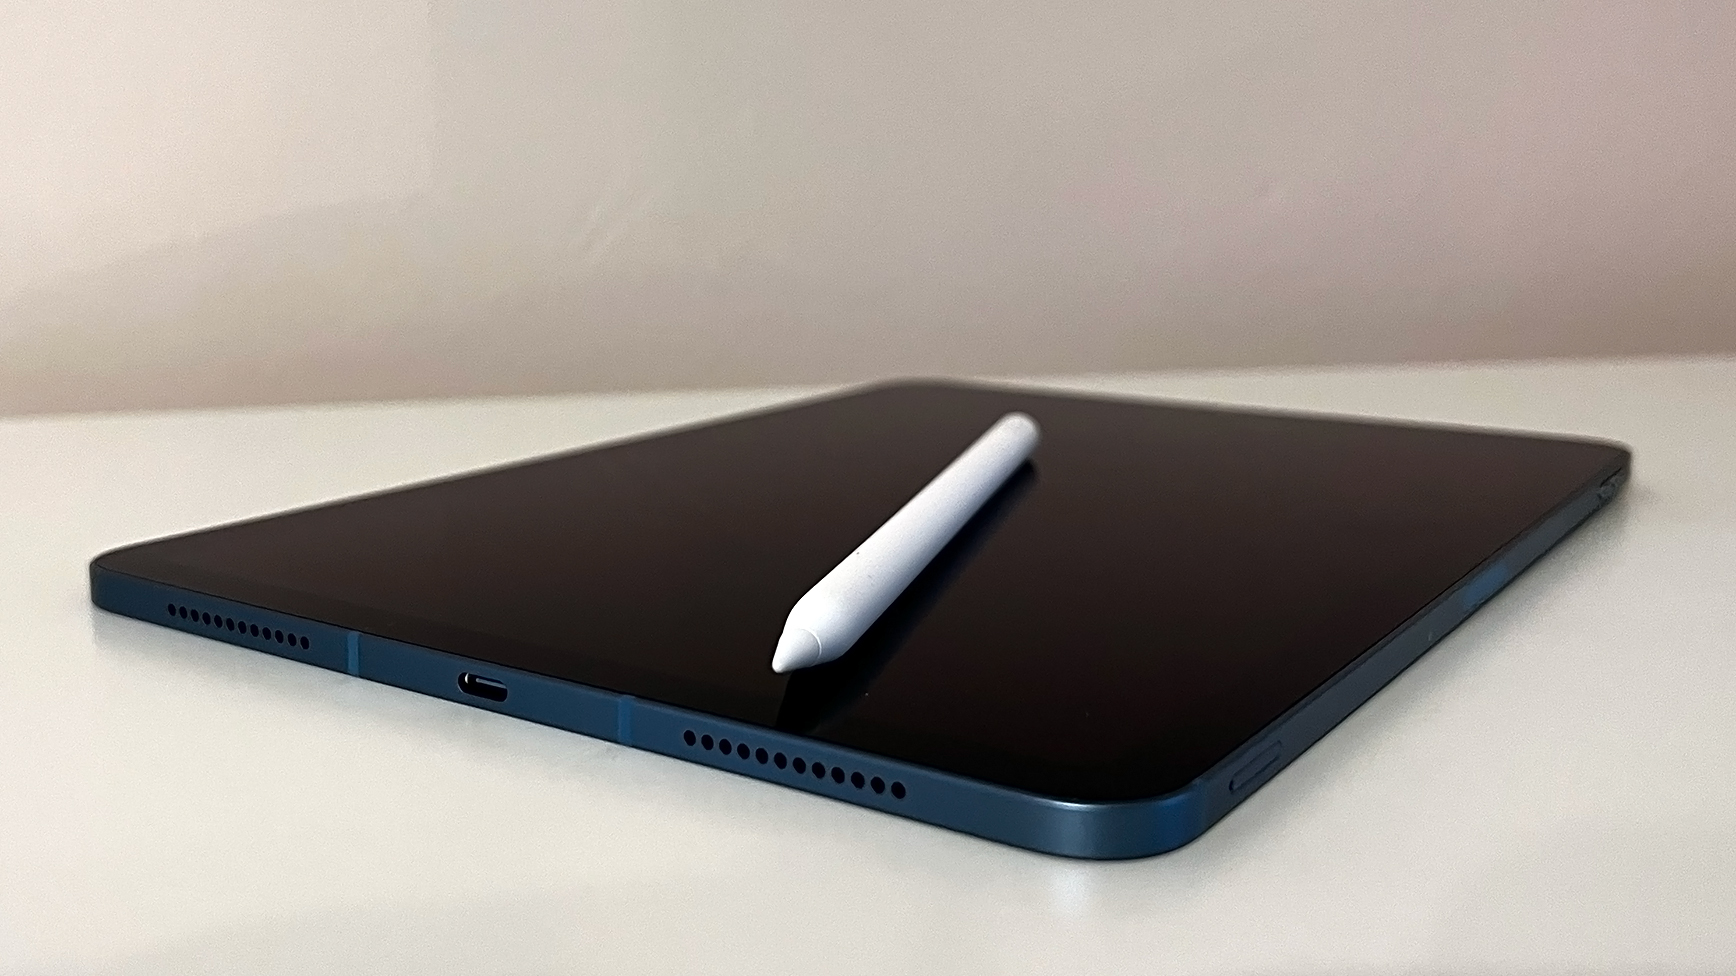 The best tablets with a stylus pen, a photo of the iPad Air 5th Gen on white table